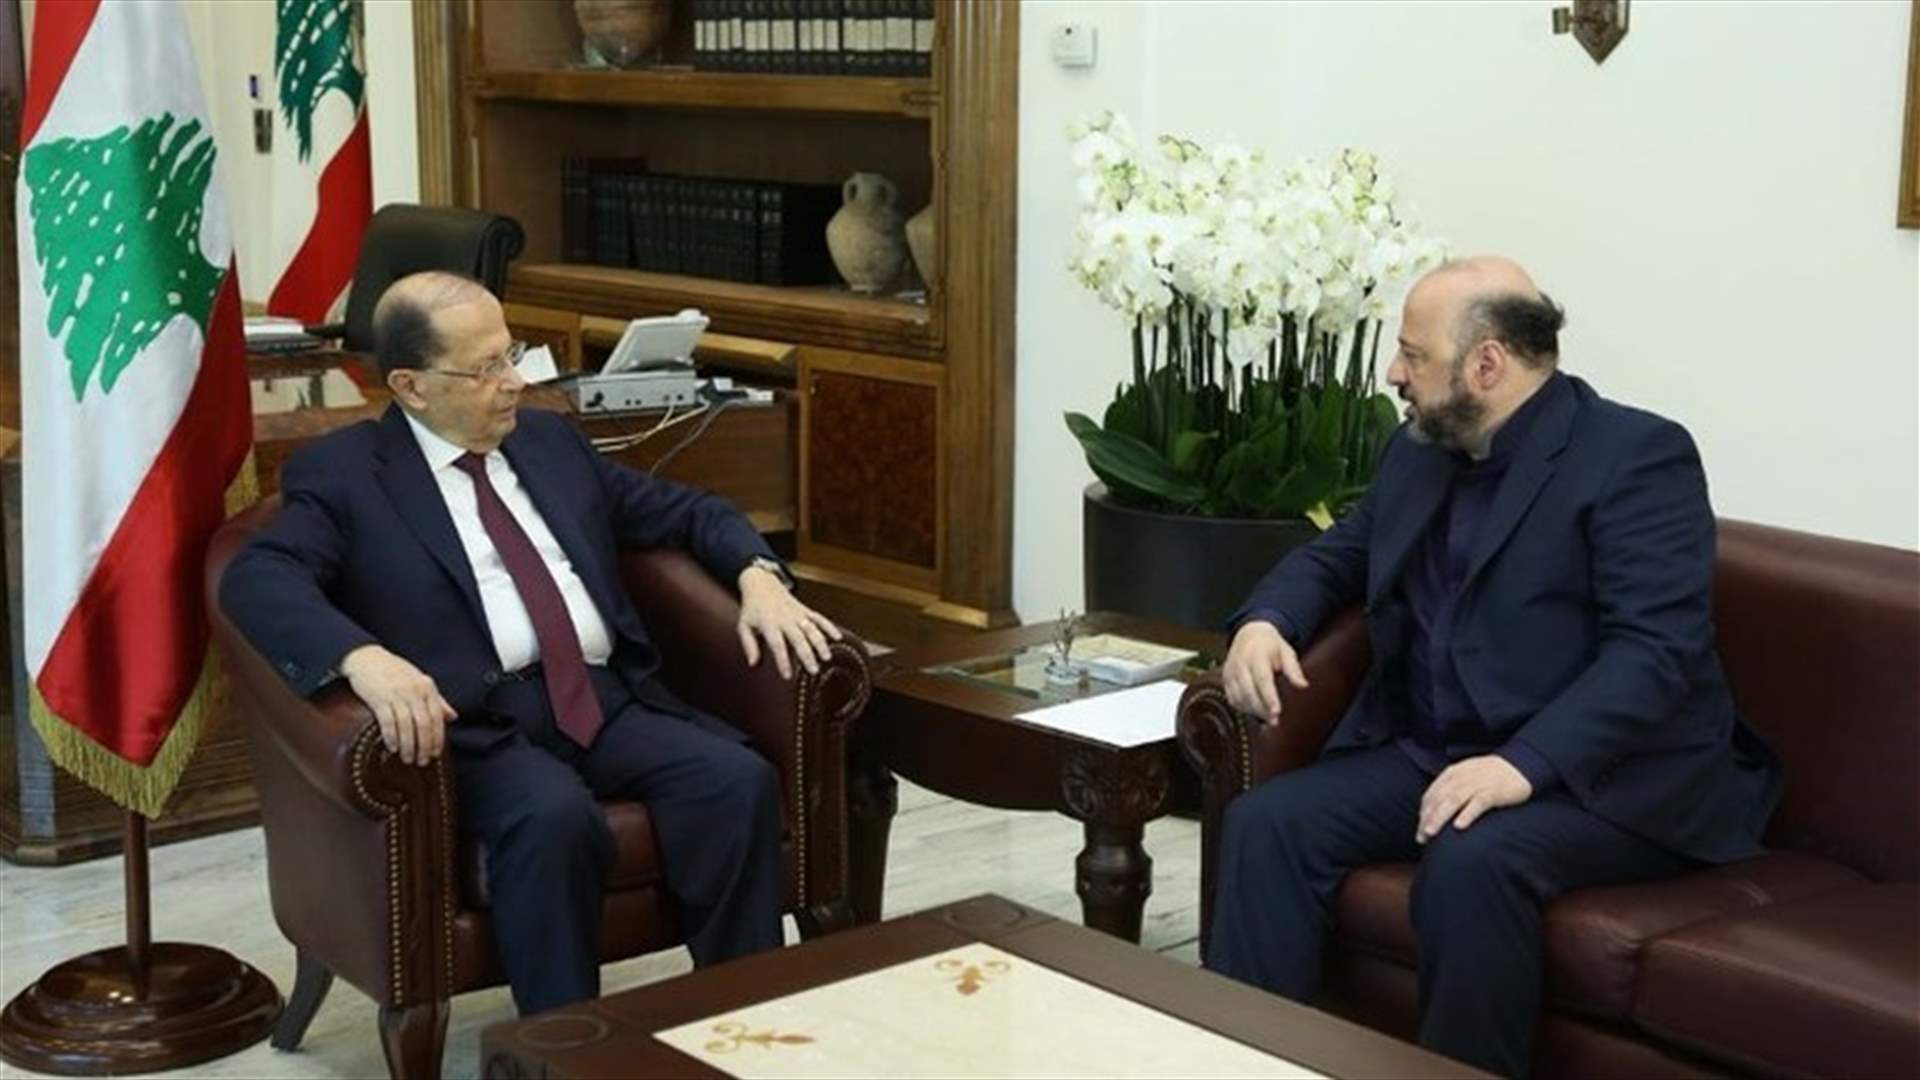 Minister Riachy briefs Aoun on media situation in Lebanon